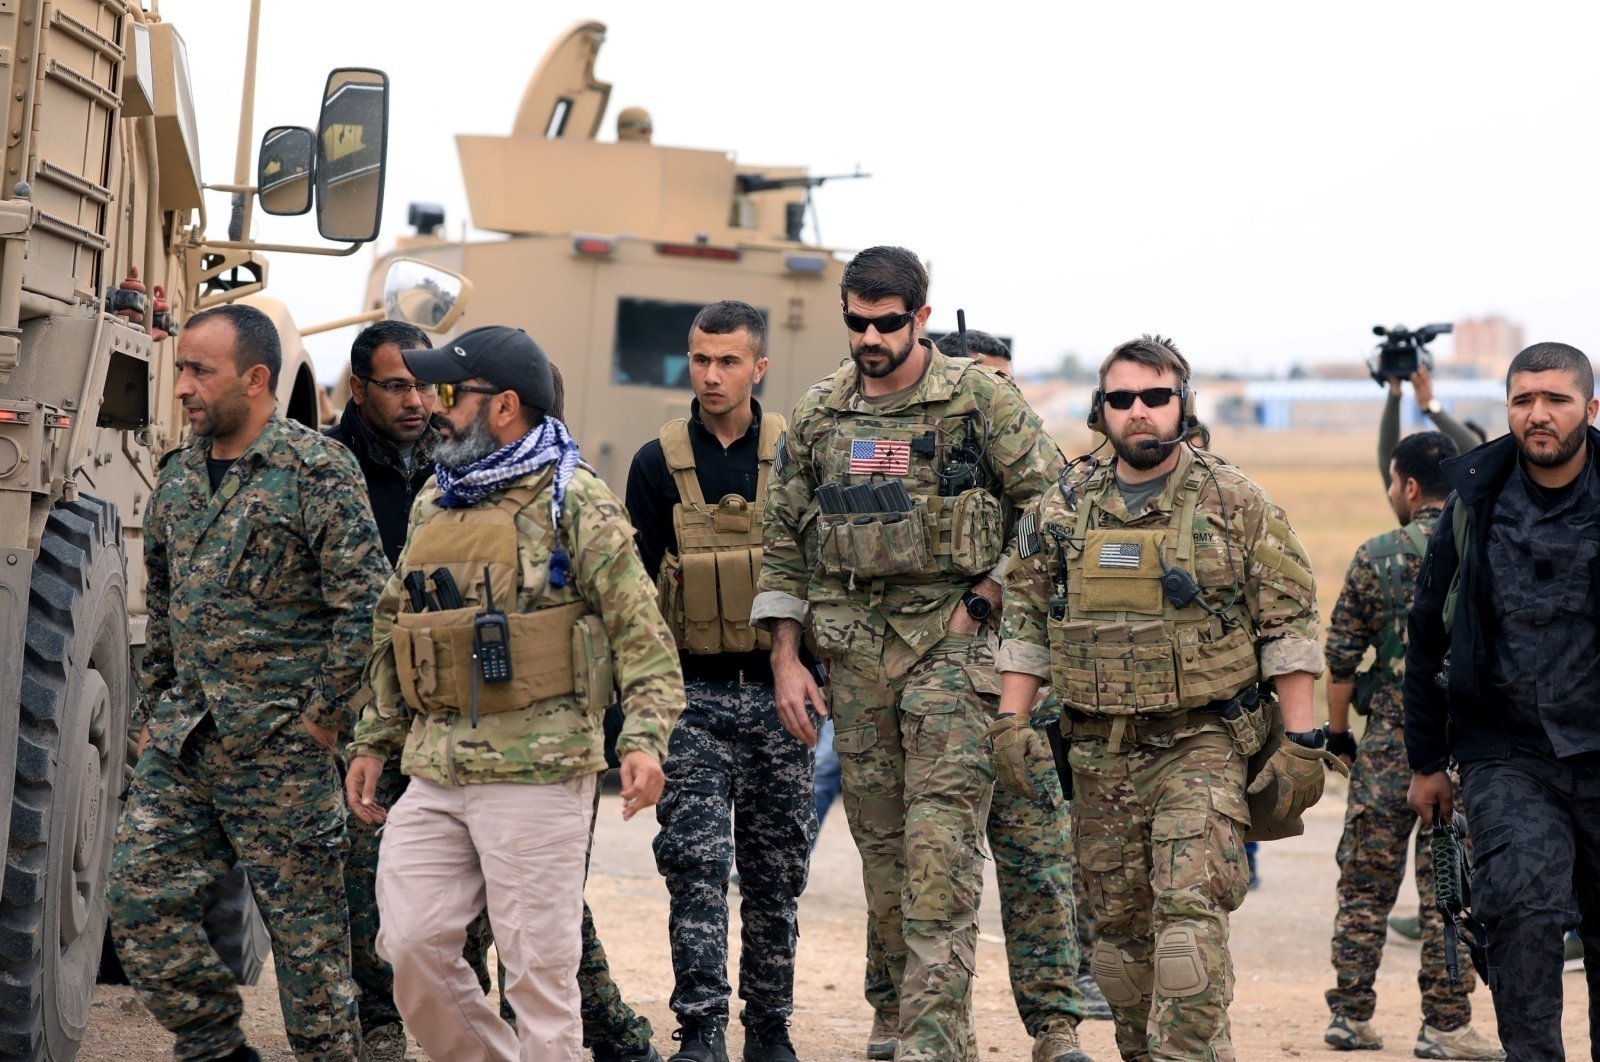 PKK/YPG terrorists and U.S. troops are seen together during a joint patrol near the Turkish border in Hassakeh, northeastern Syria, Nov. 4, 2018. (Reuters File Photo)